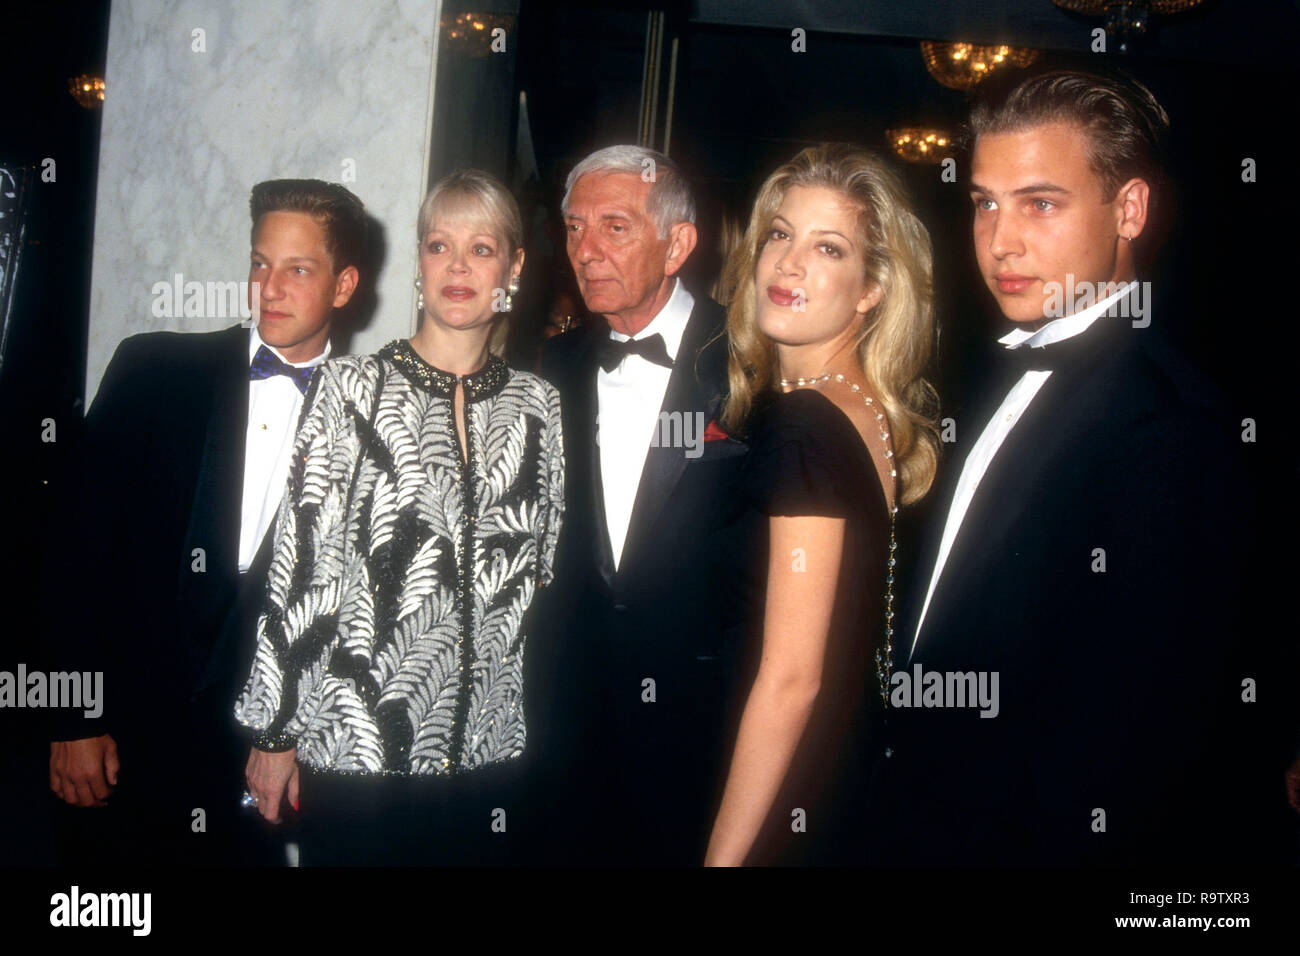 BEVERLY HILLS, CA - JUNE 24: Actor Randy Spelling, Candy Spelling, producer Aaron Spelling, actress Tori Spelling and actor Nick Savalas attend RP International's 20th Annual Vision Awards on June 24, 1993 at the Regent Beverly Wilshire Hotel in Beverly Hills, California. Photo by Barry King/Alamy Stock Photo Stock Photo